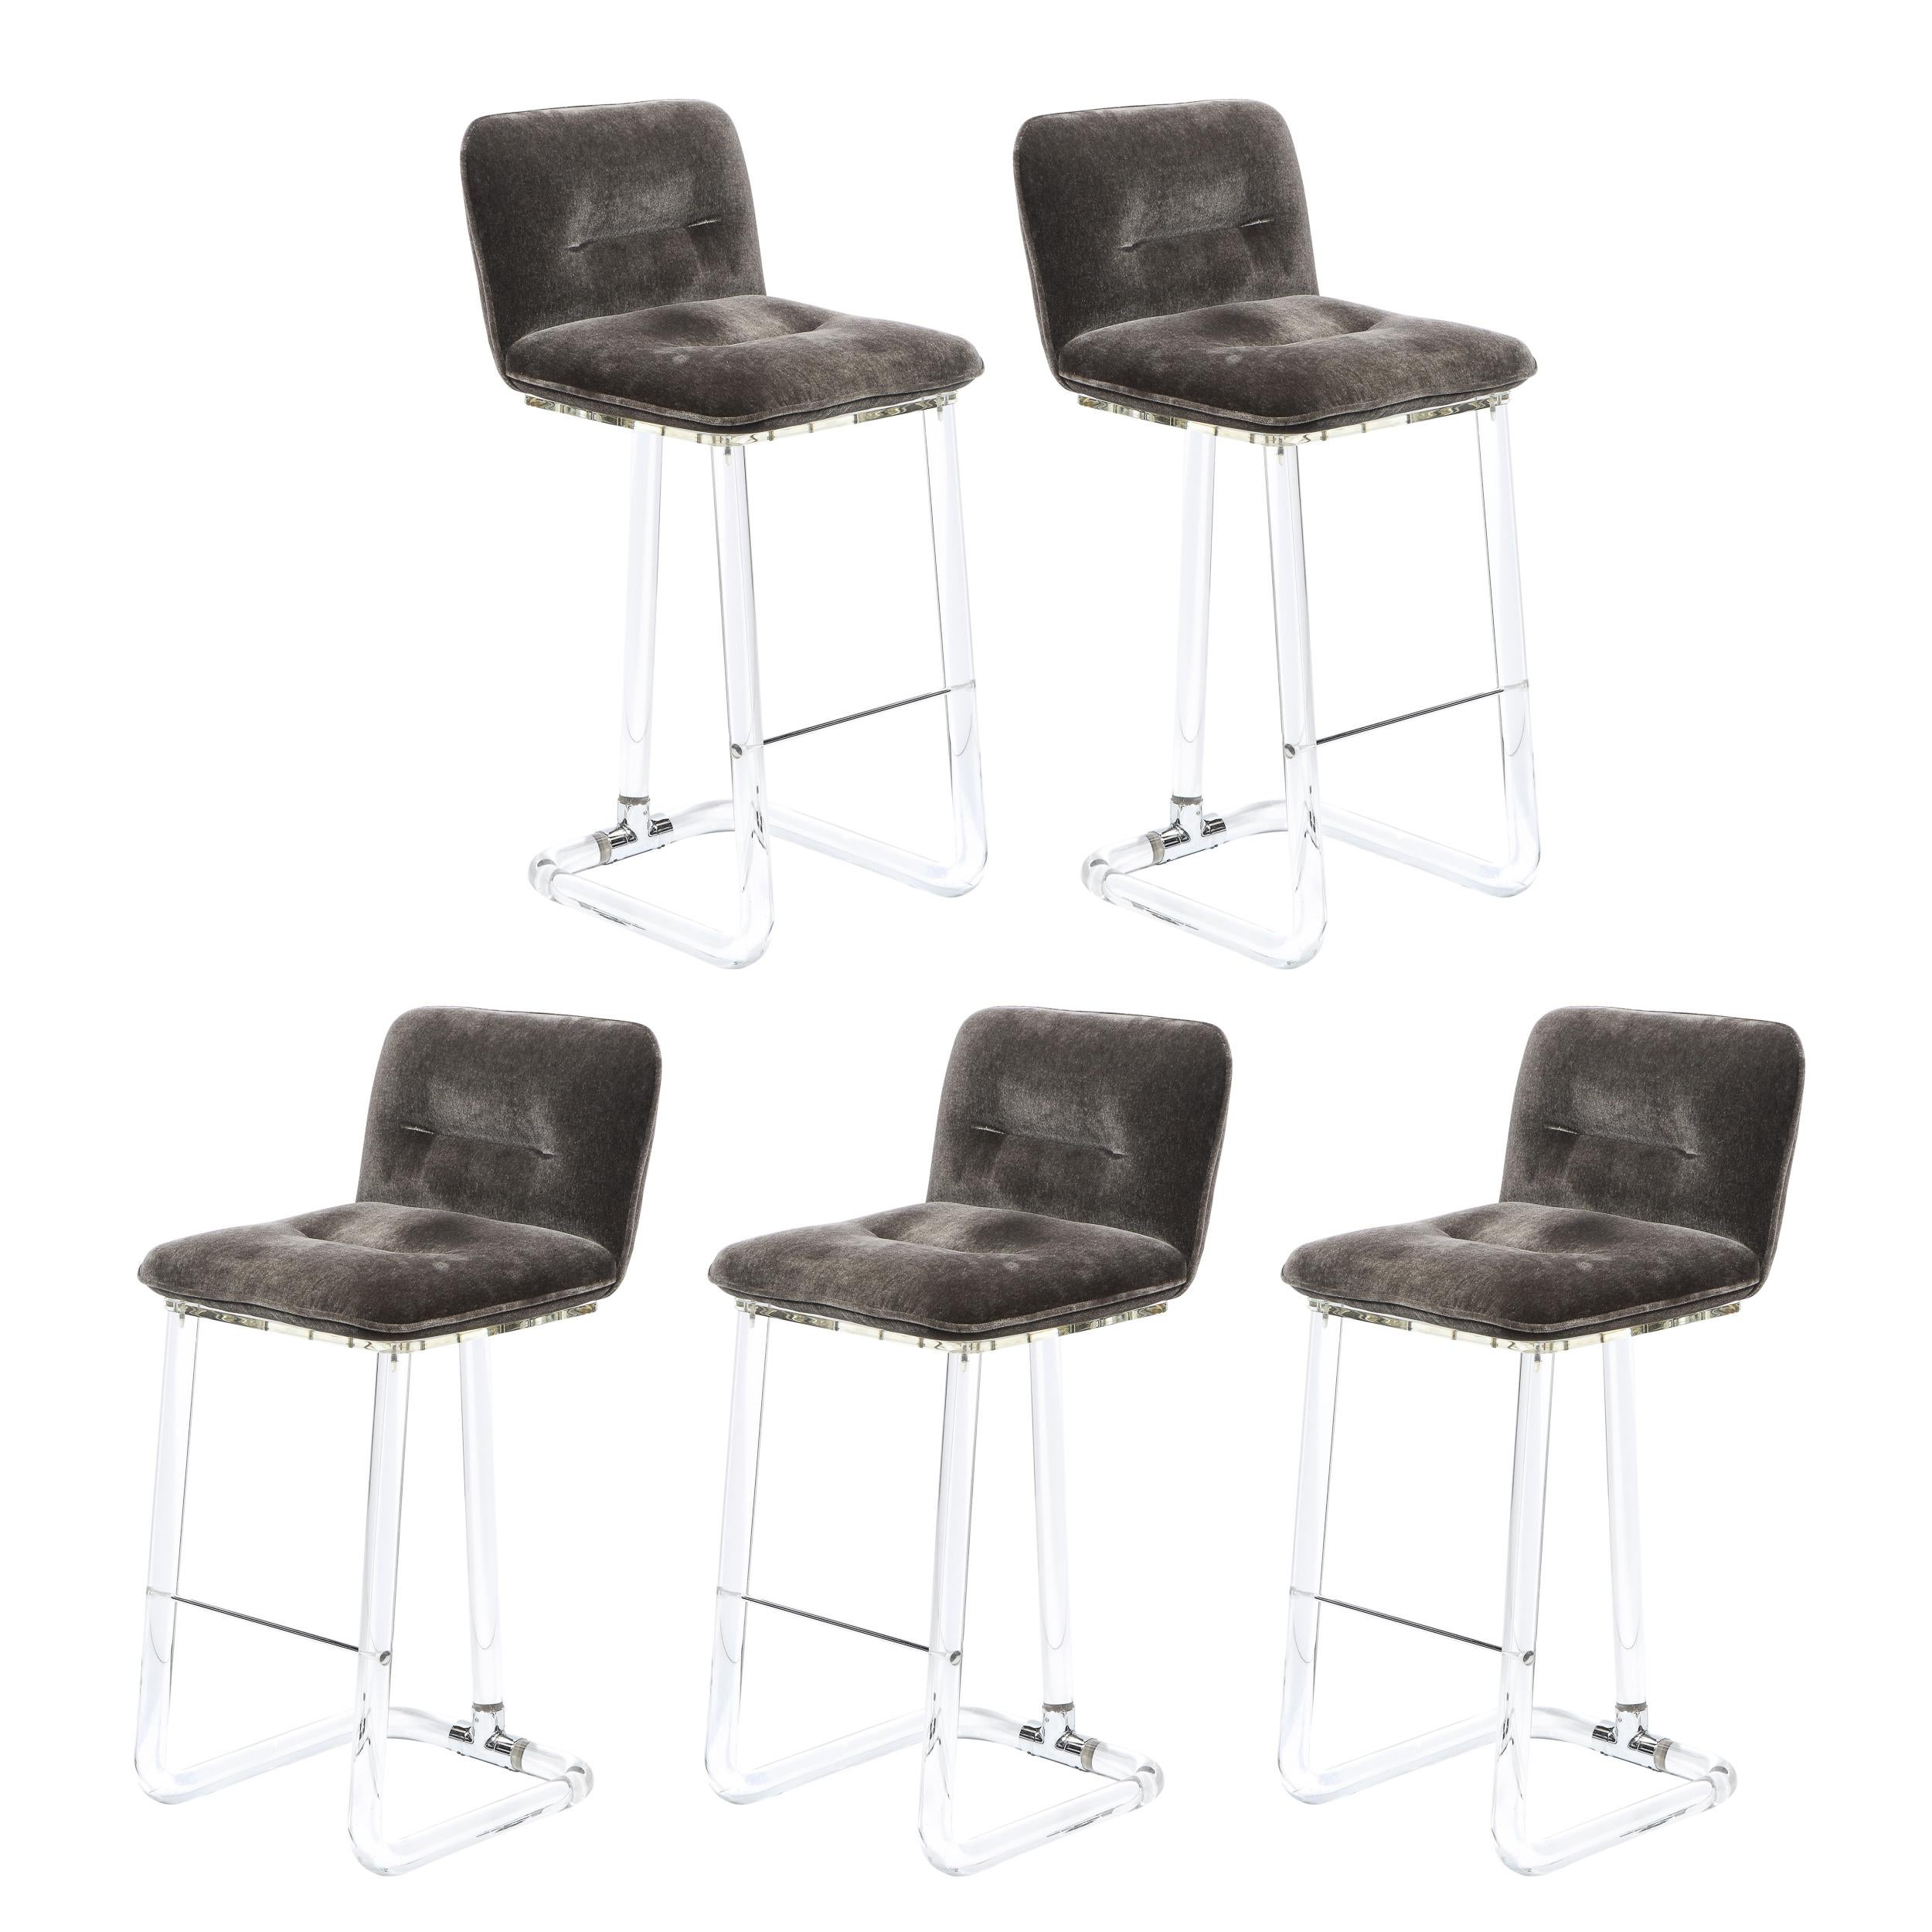 This stunning set of five Mid-Century Modern swiveling bar stools were realized by Leon Frost of Lion in Frost in the United States circa 1975. They feature a tufted seat and back with button detailing in slate mohair sitting atop two cylindrical